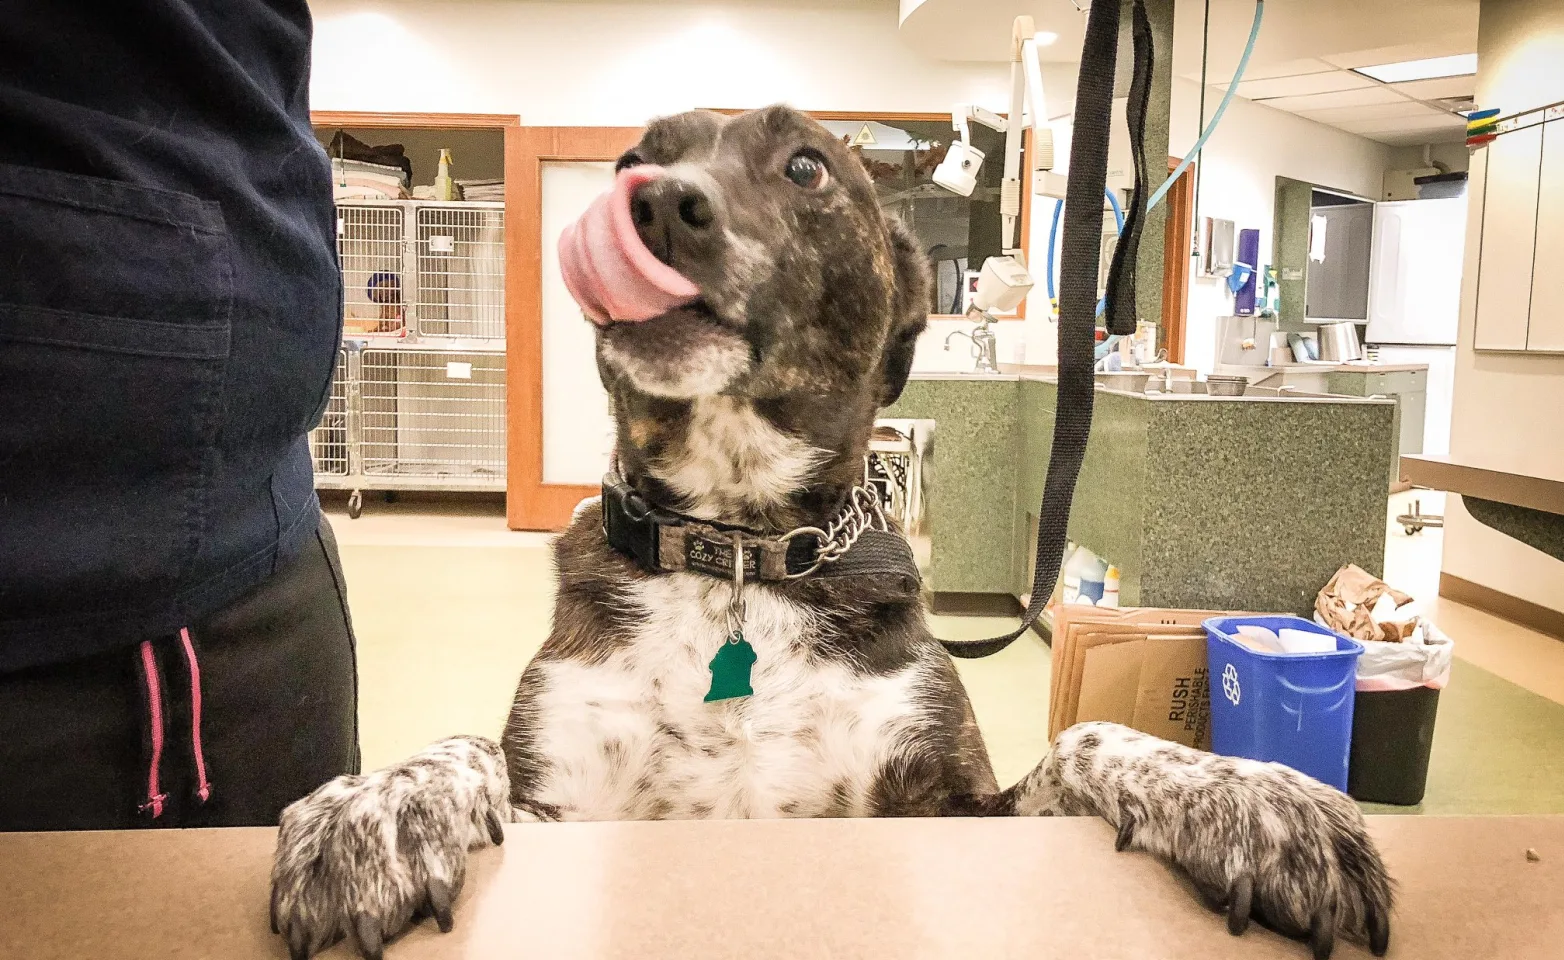 Dog licking nose in office